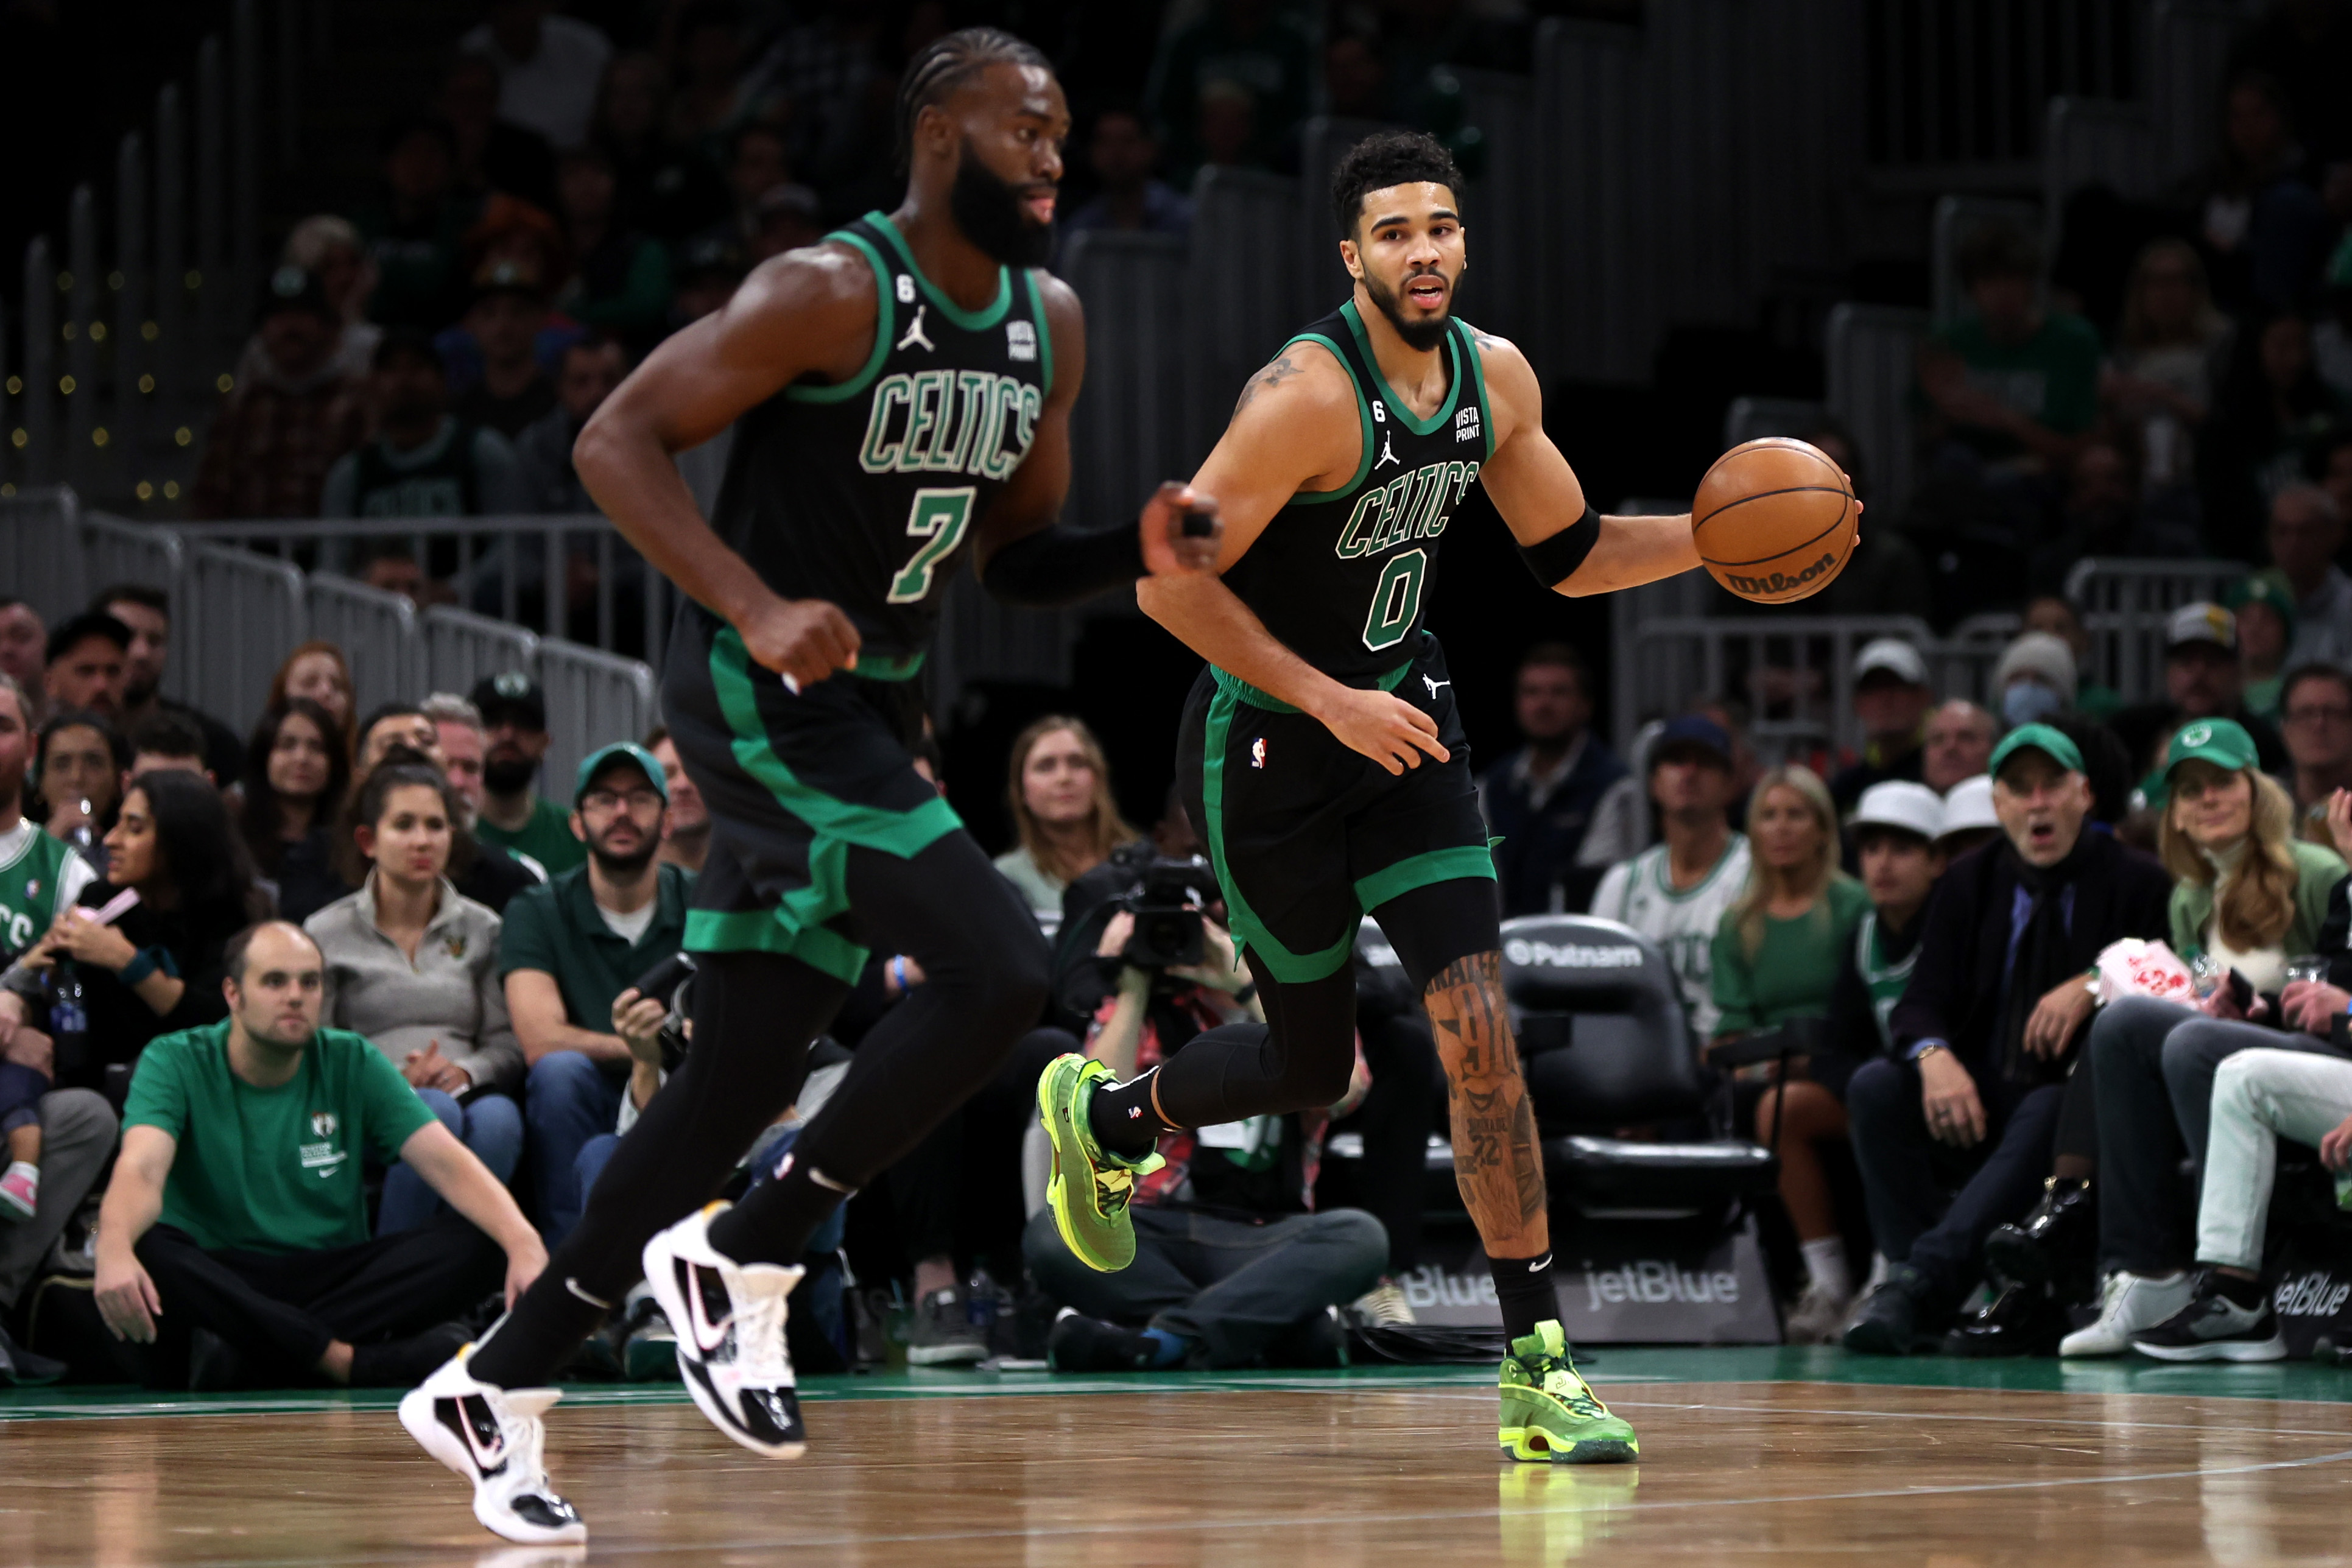 Jayson Tatum of the Boston Celtics dribbles downcourt next to Jaylen Brown during the first half of the game against the Cleveland Cavaliers at TD Garden on October 28, 2022, in Boston, Massachusetts.